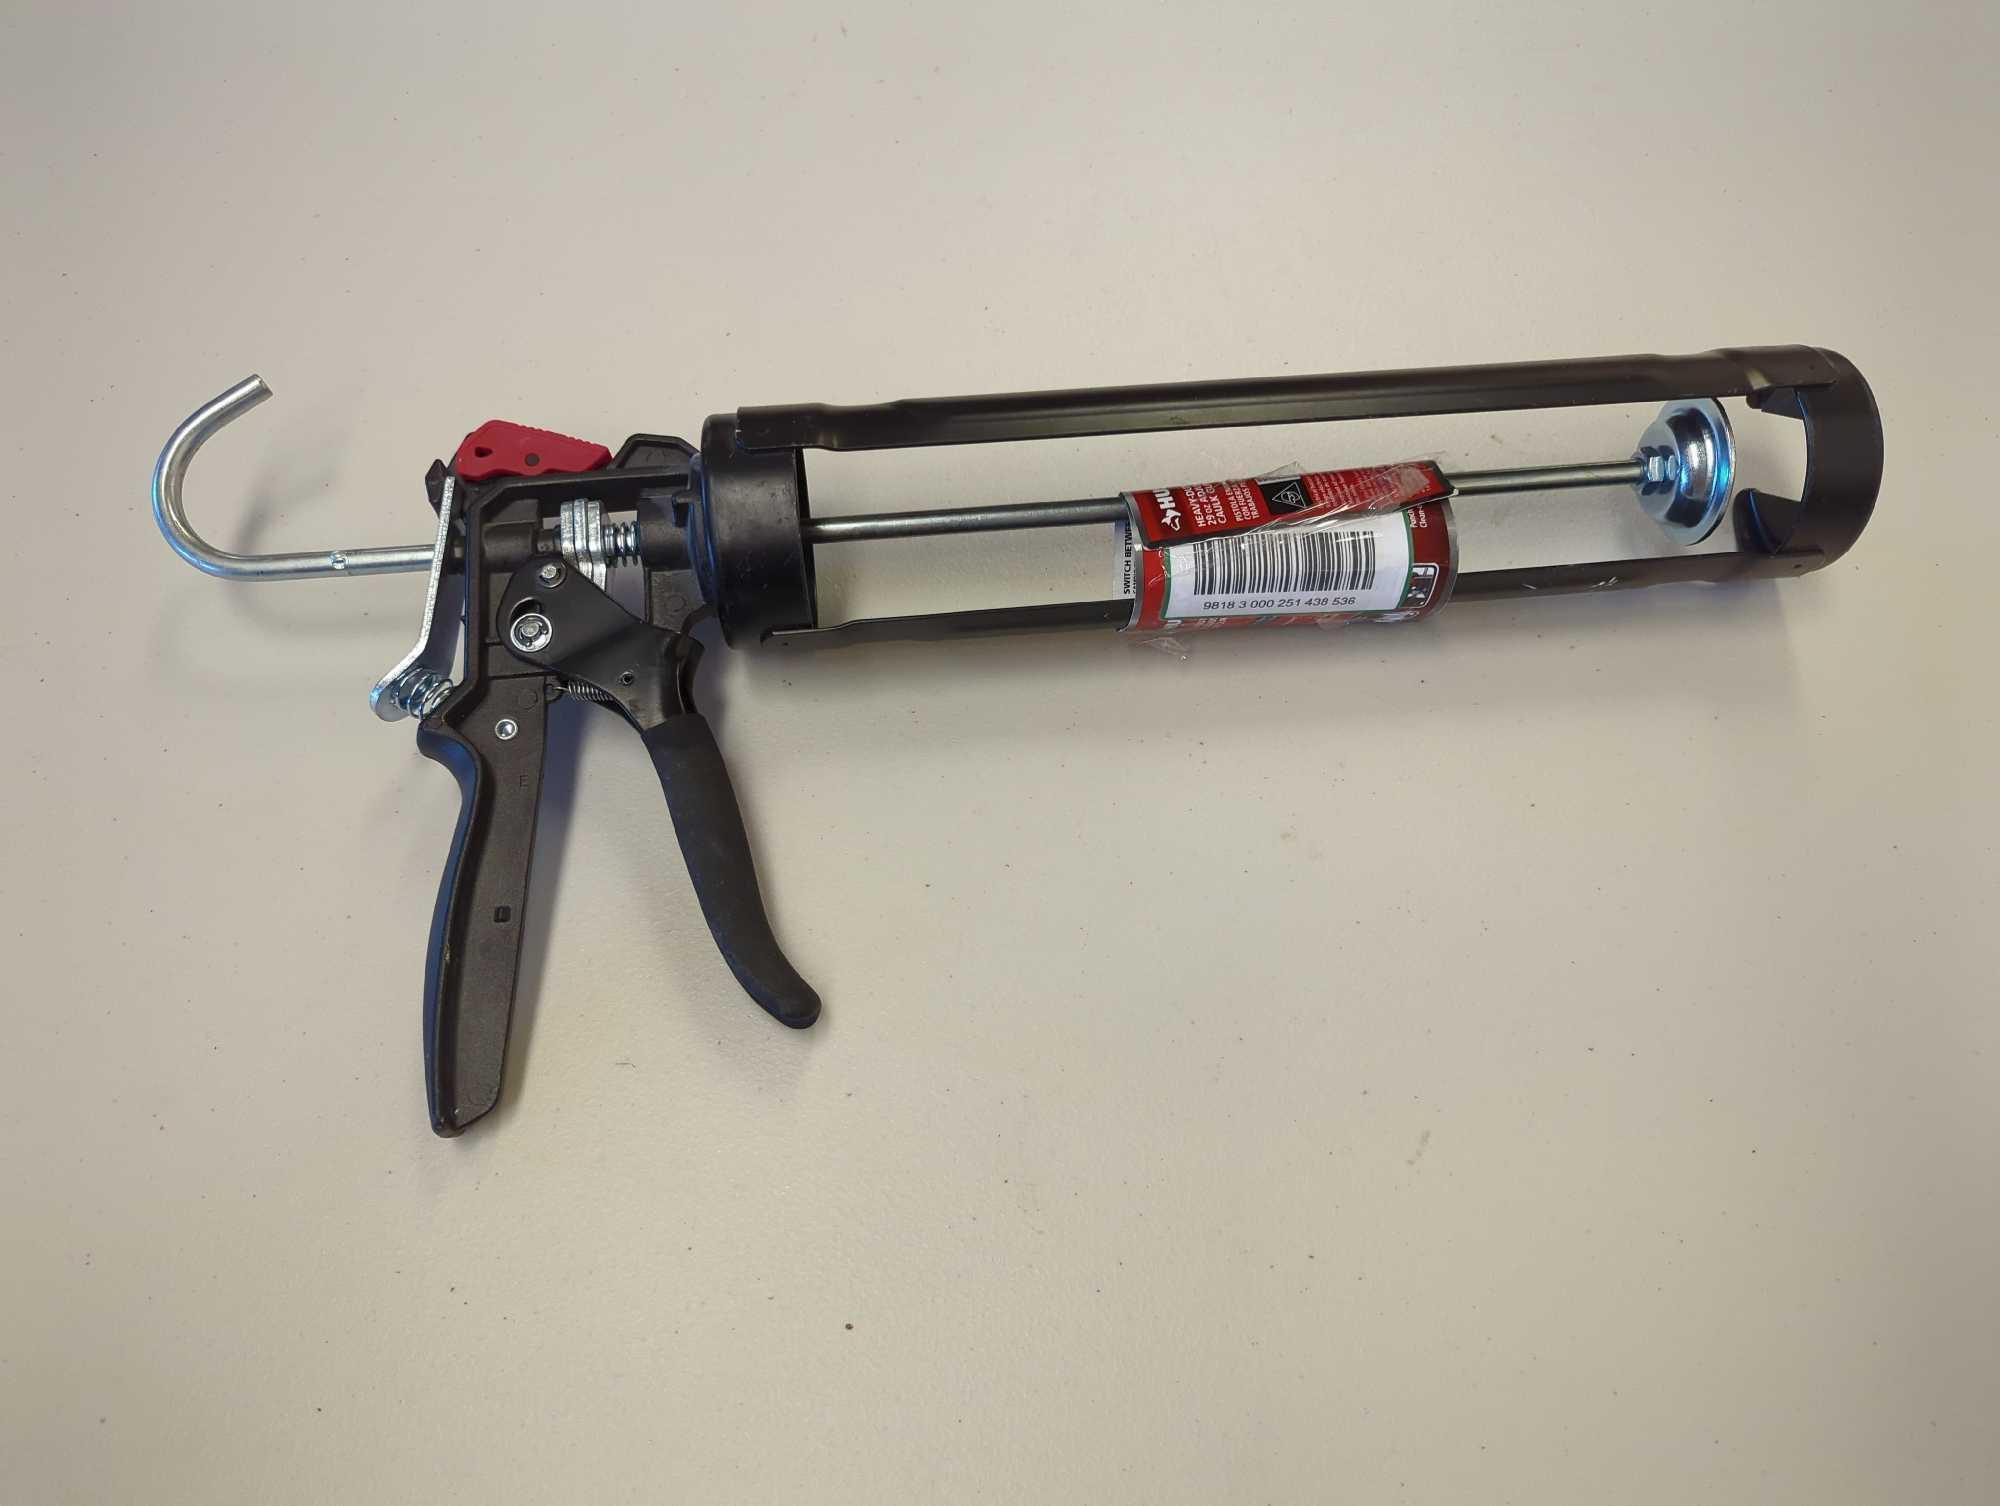 Husky 29 oz. Heavy-Duty High Leverage Drip Free Caulk Gun. Comes as shown in photos. Appears to be